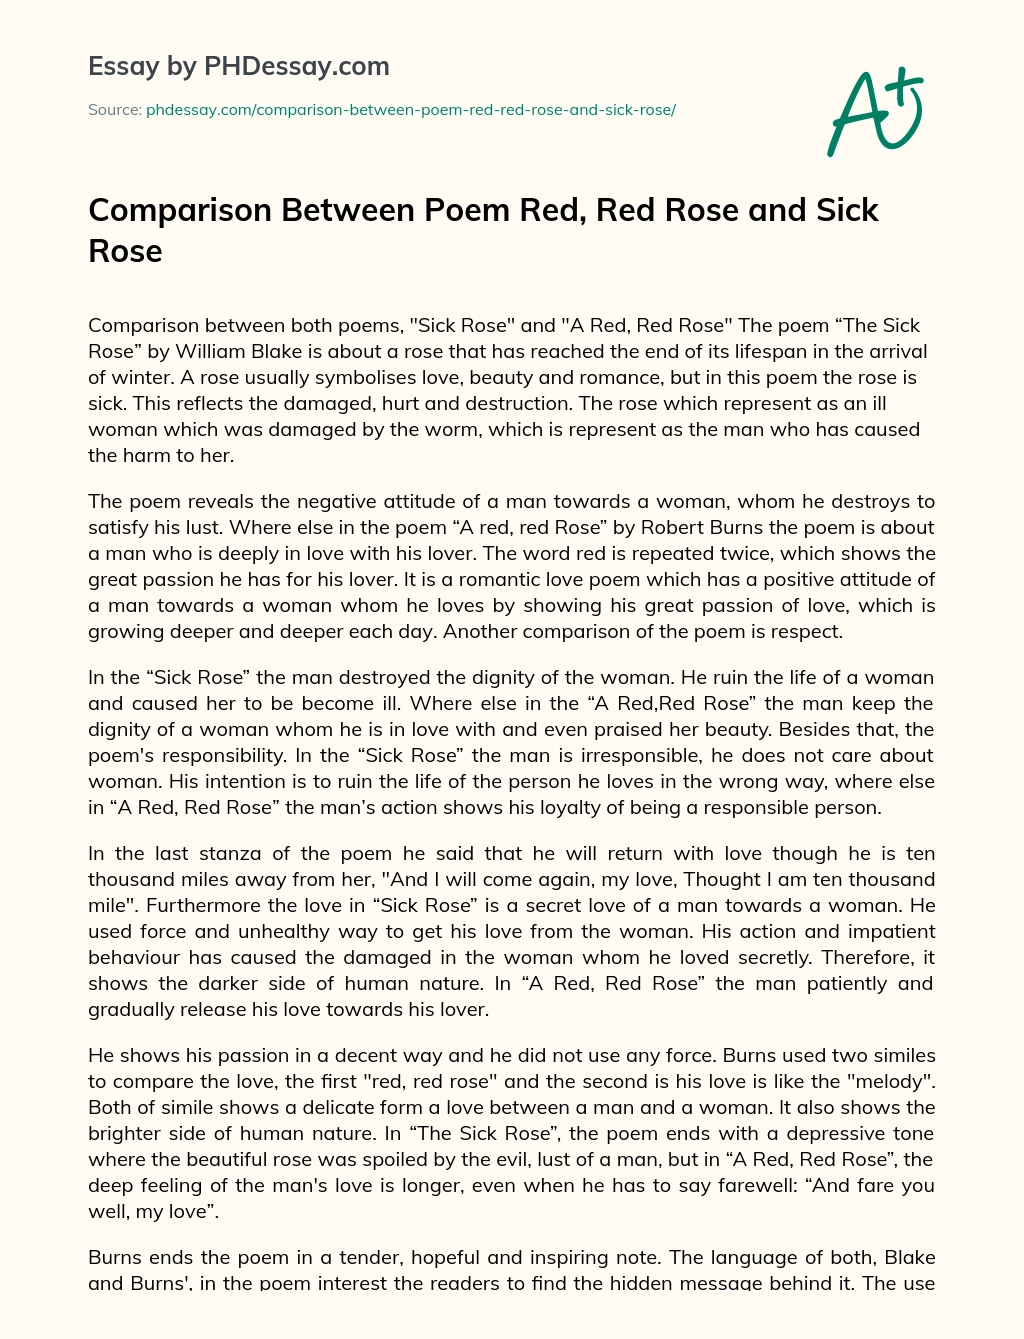 Comparison Between Poem Red, Red Rose and  Sick Rose essay